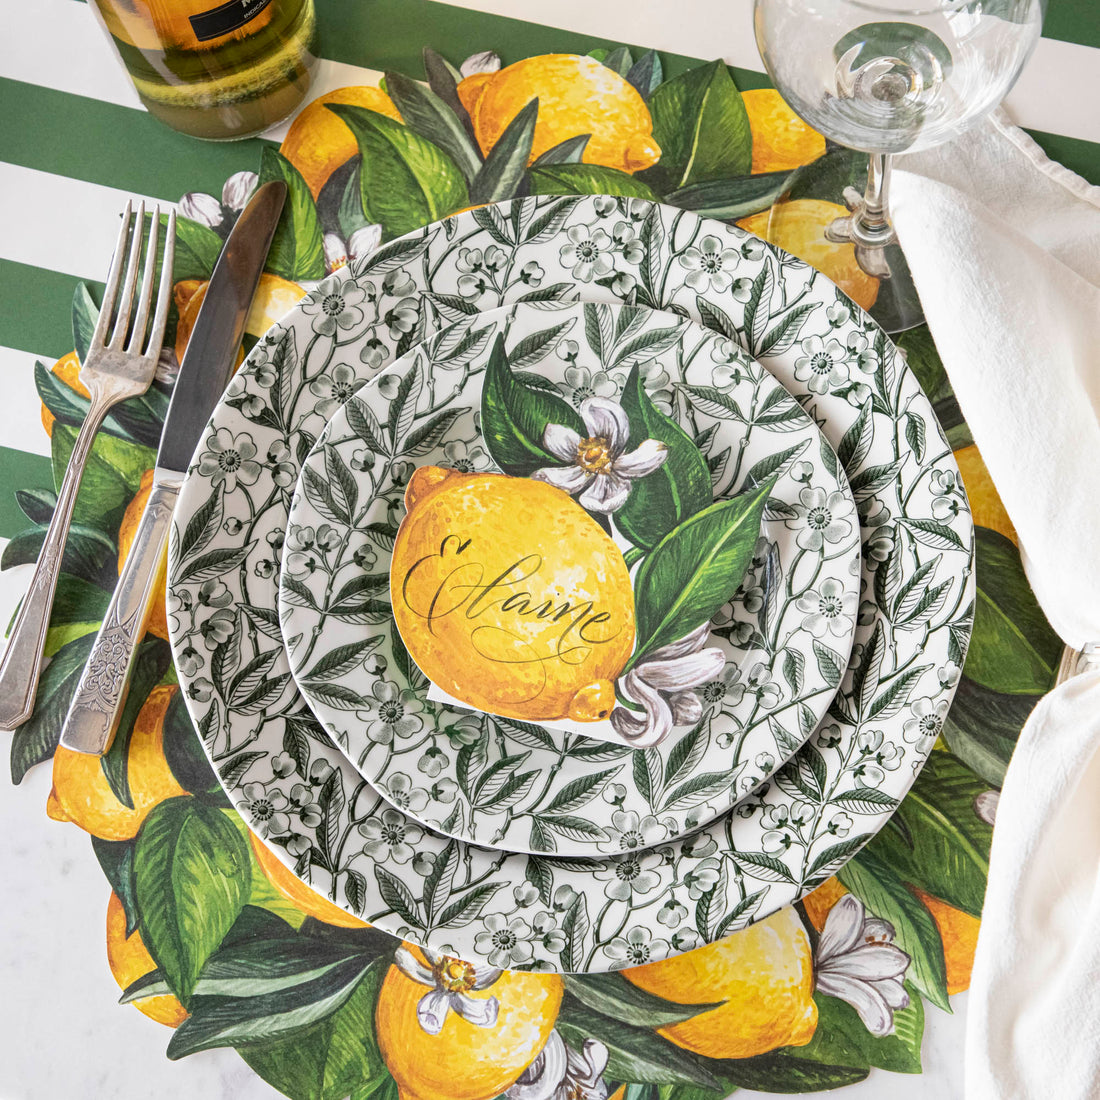 Elegant table setting with Burleigh Green Prunus Dinnerware plates and green striped tablecloth.